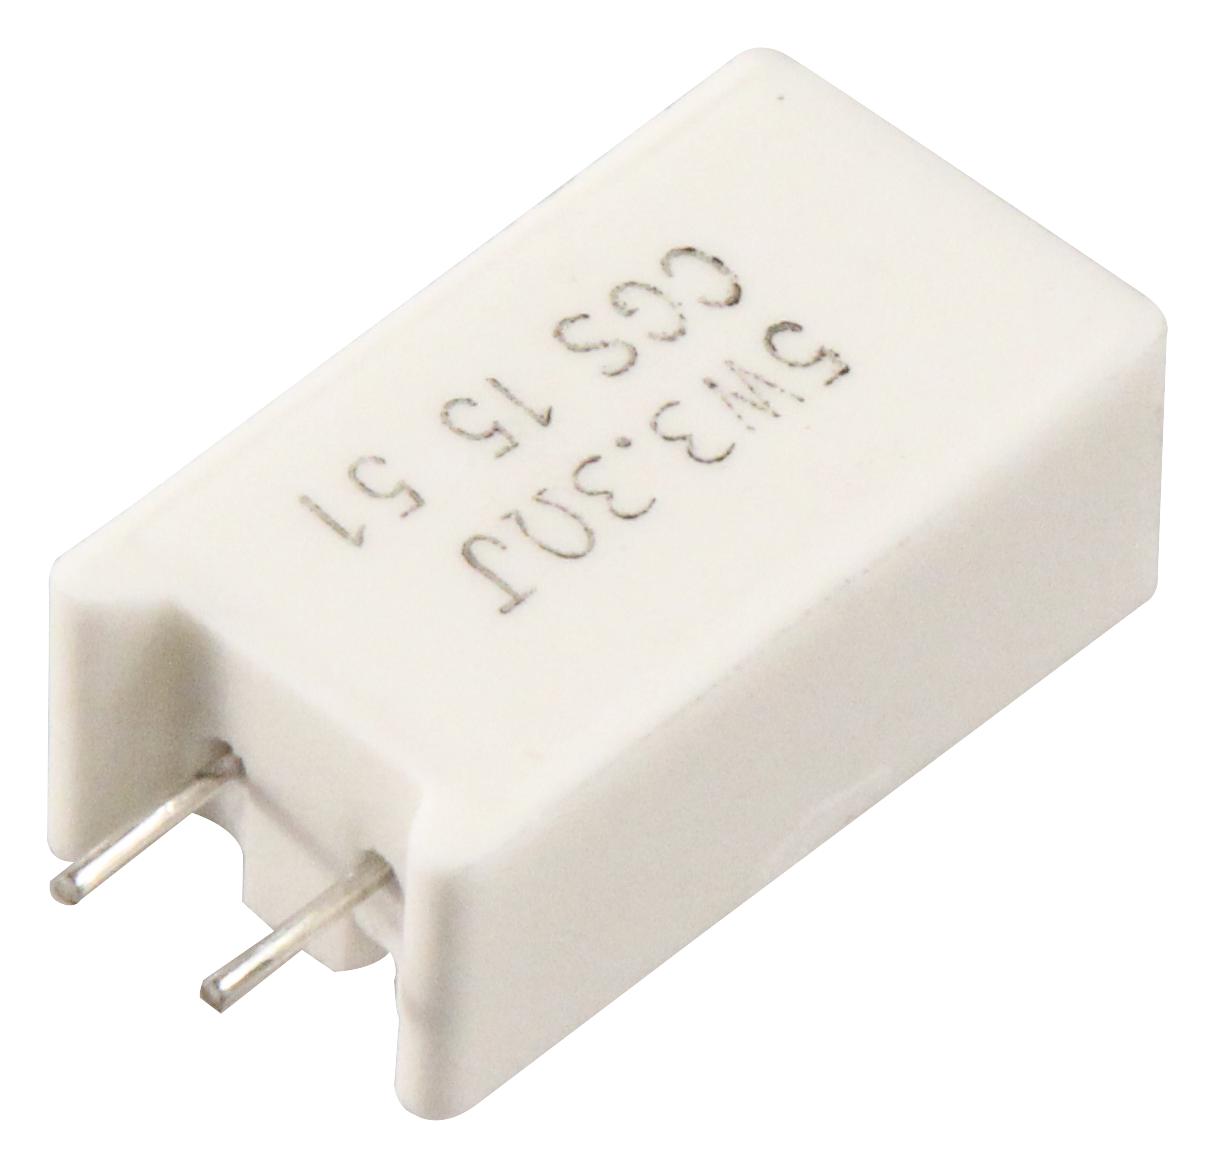 SQMW10S10RJ RES, 10R, 5%, 10W, RADIAL, WIREWOUND CGS - TE CONNECTIVITY